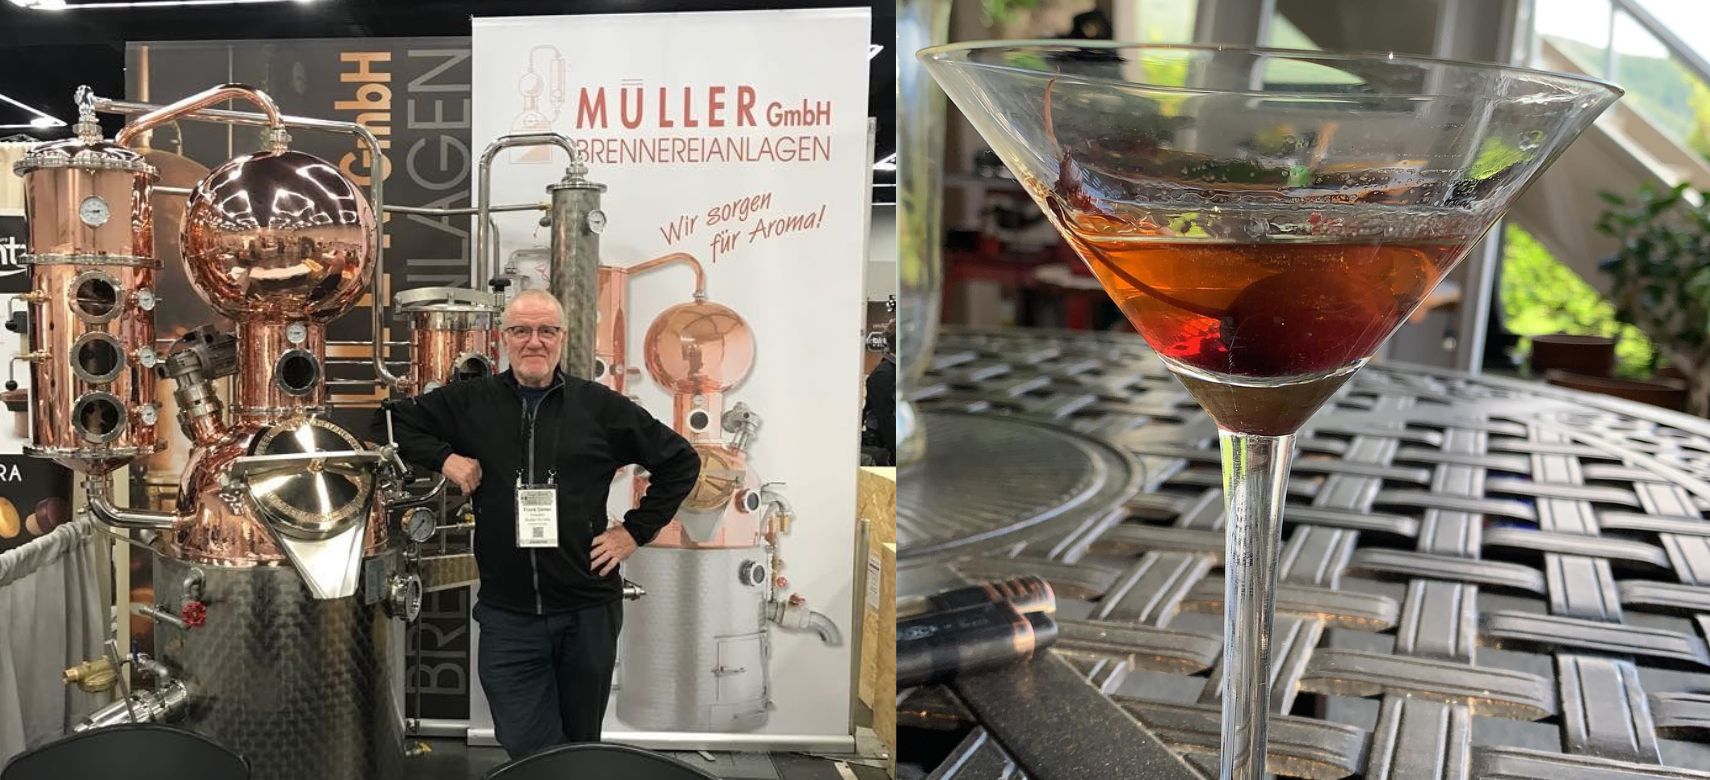 Photo for: A good distiller needs to have good senses of smell and taste, says Frank Deiter.